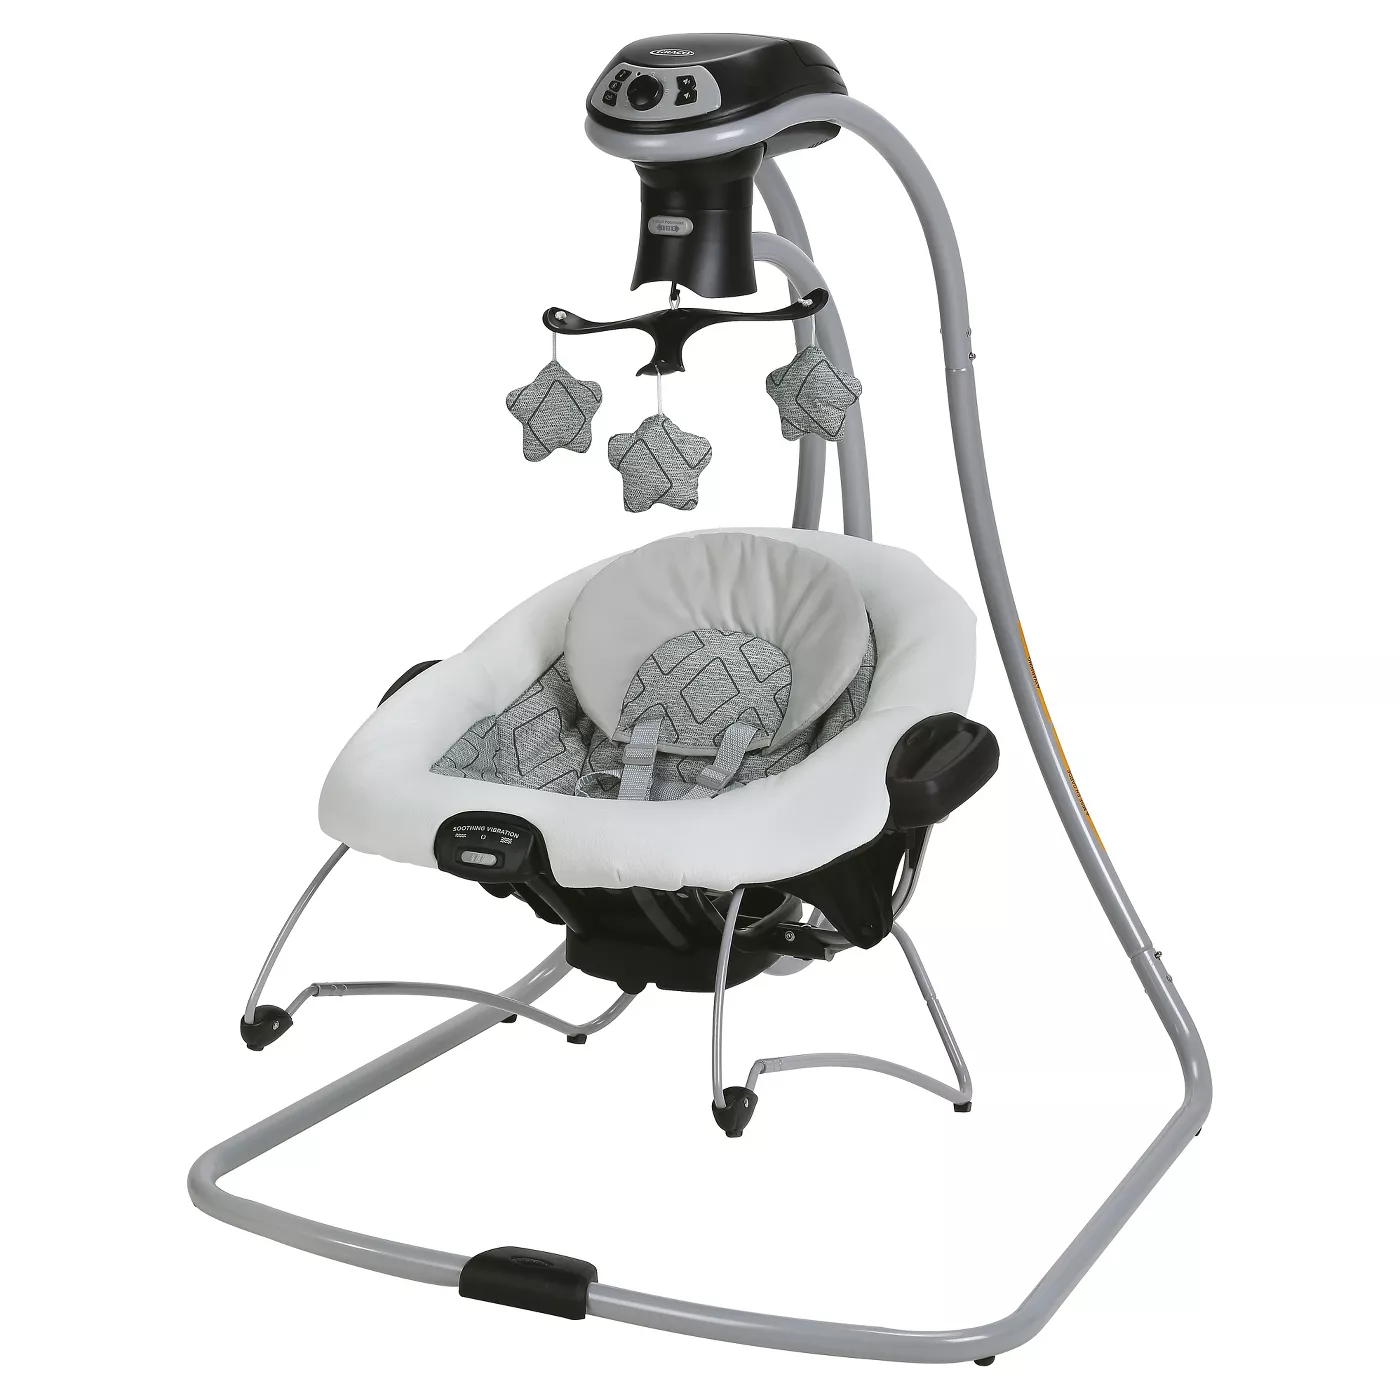 Graco DuetConnect LX Multi-Direction Baby Swing and Bouncer - Asher - image 1 of 9